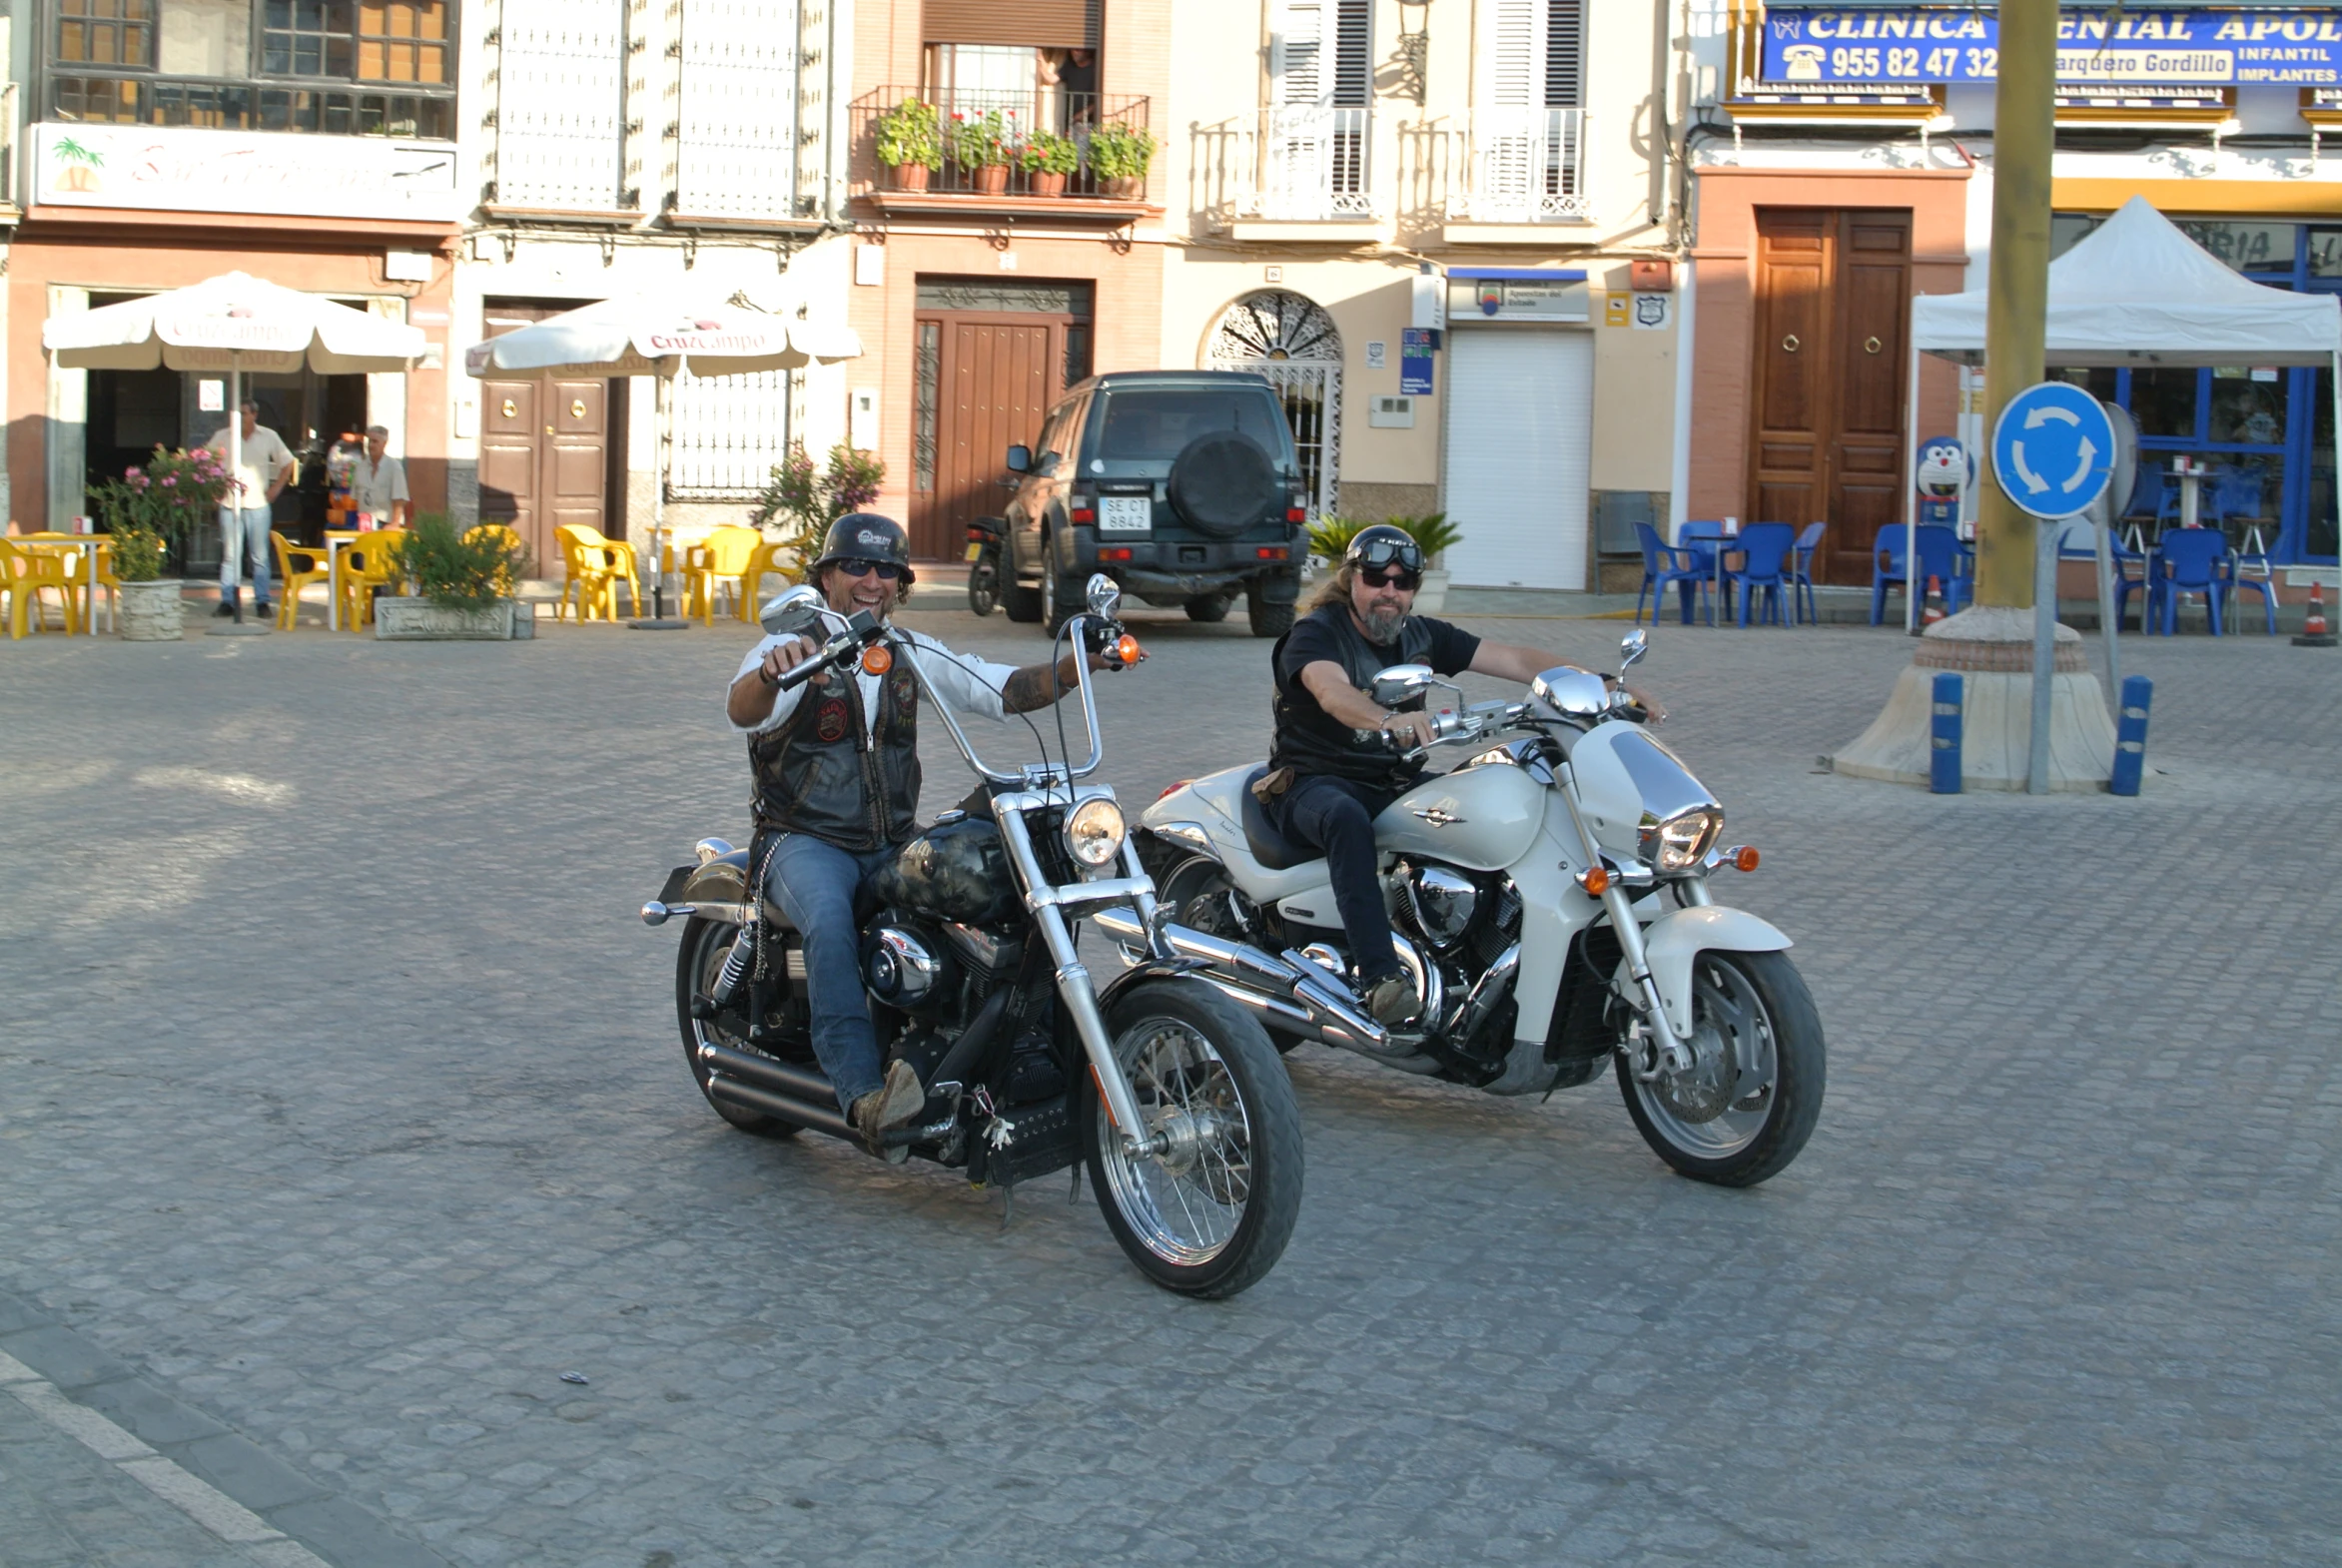 the two men are wearing leather jackets and helmets on their motorcycles